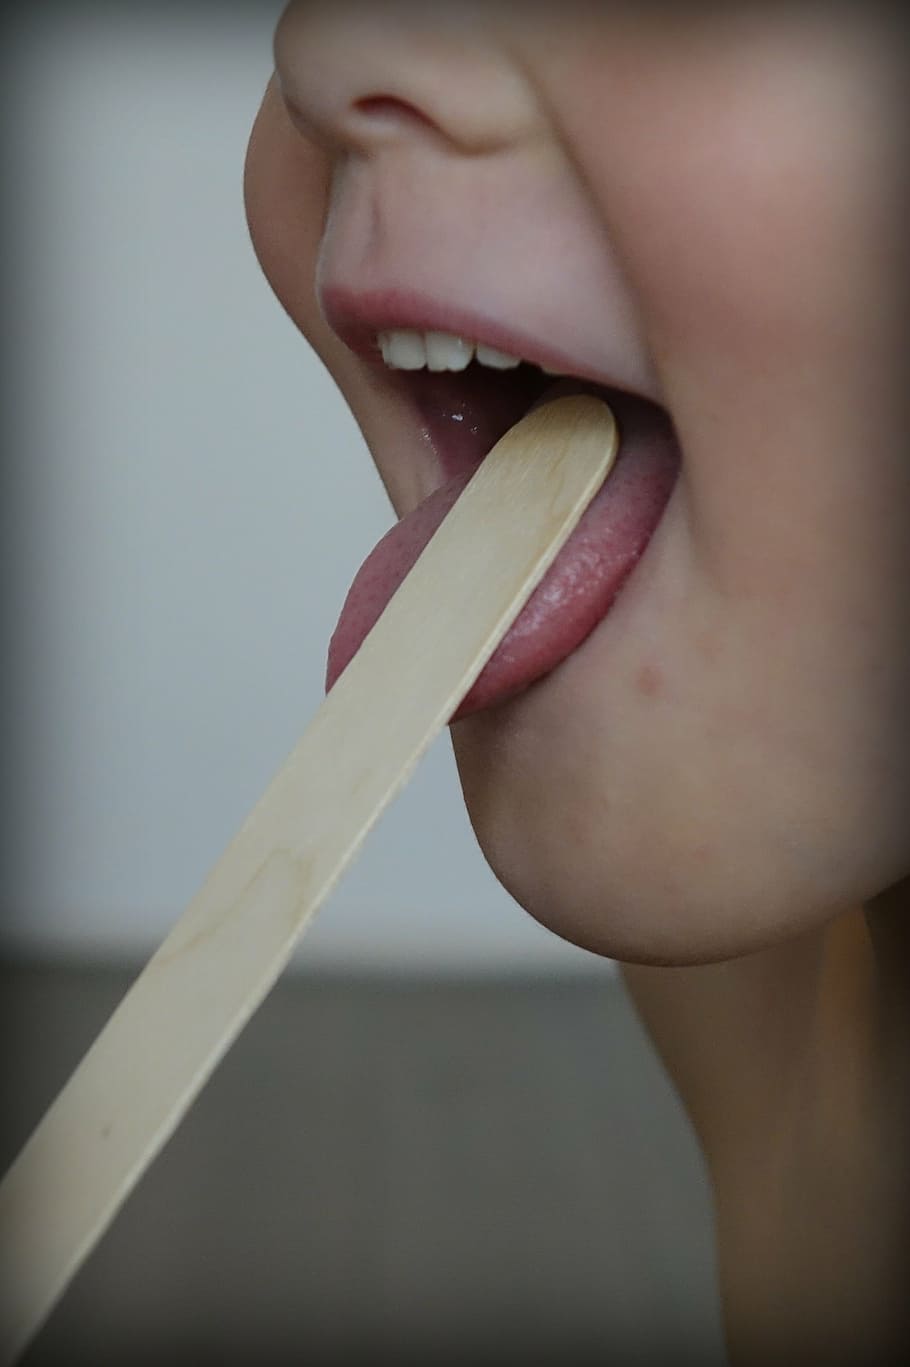 person, sticking, tongue, brown, popsicle, stick, investigation, bless you, medical, doctor